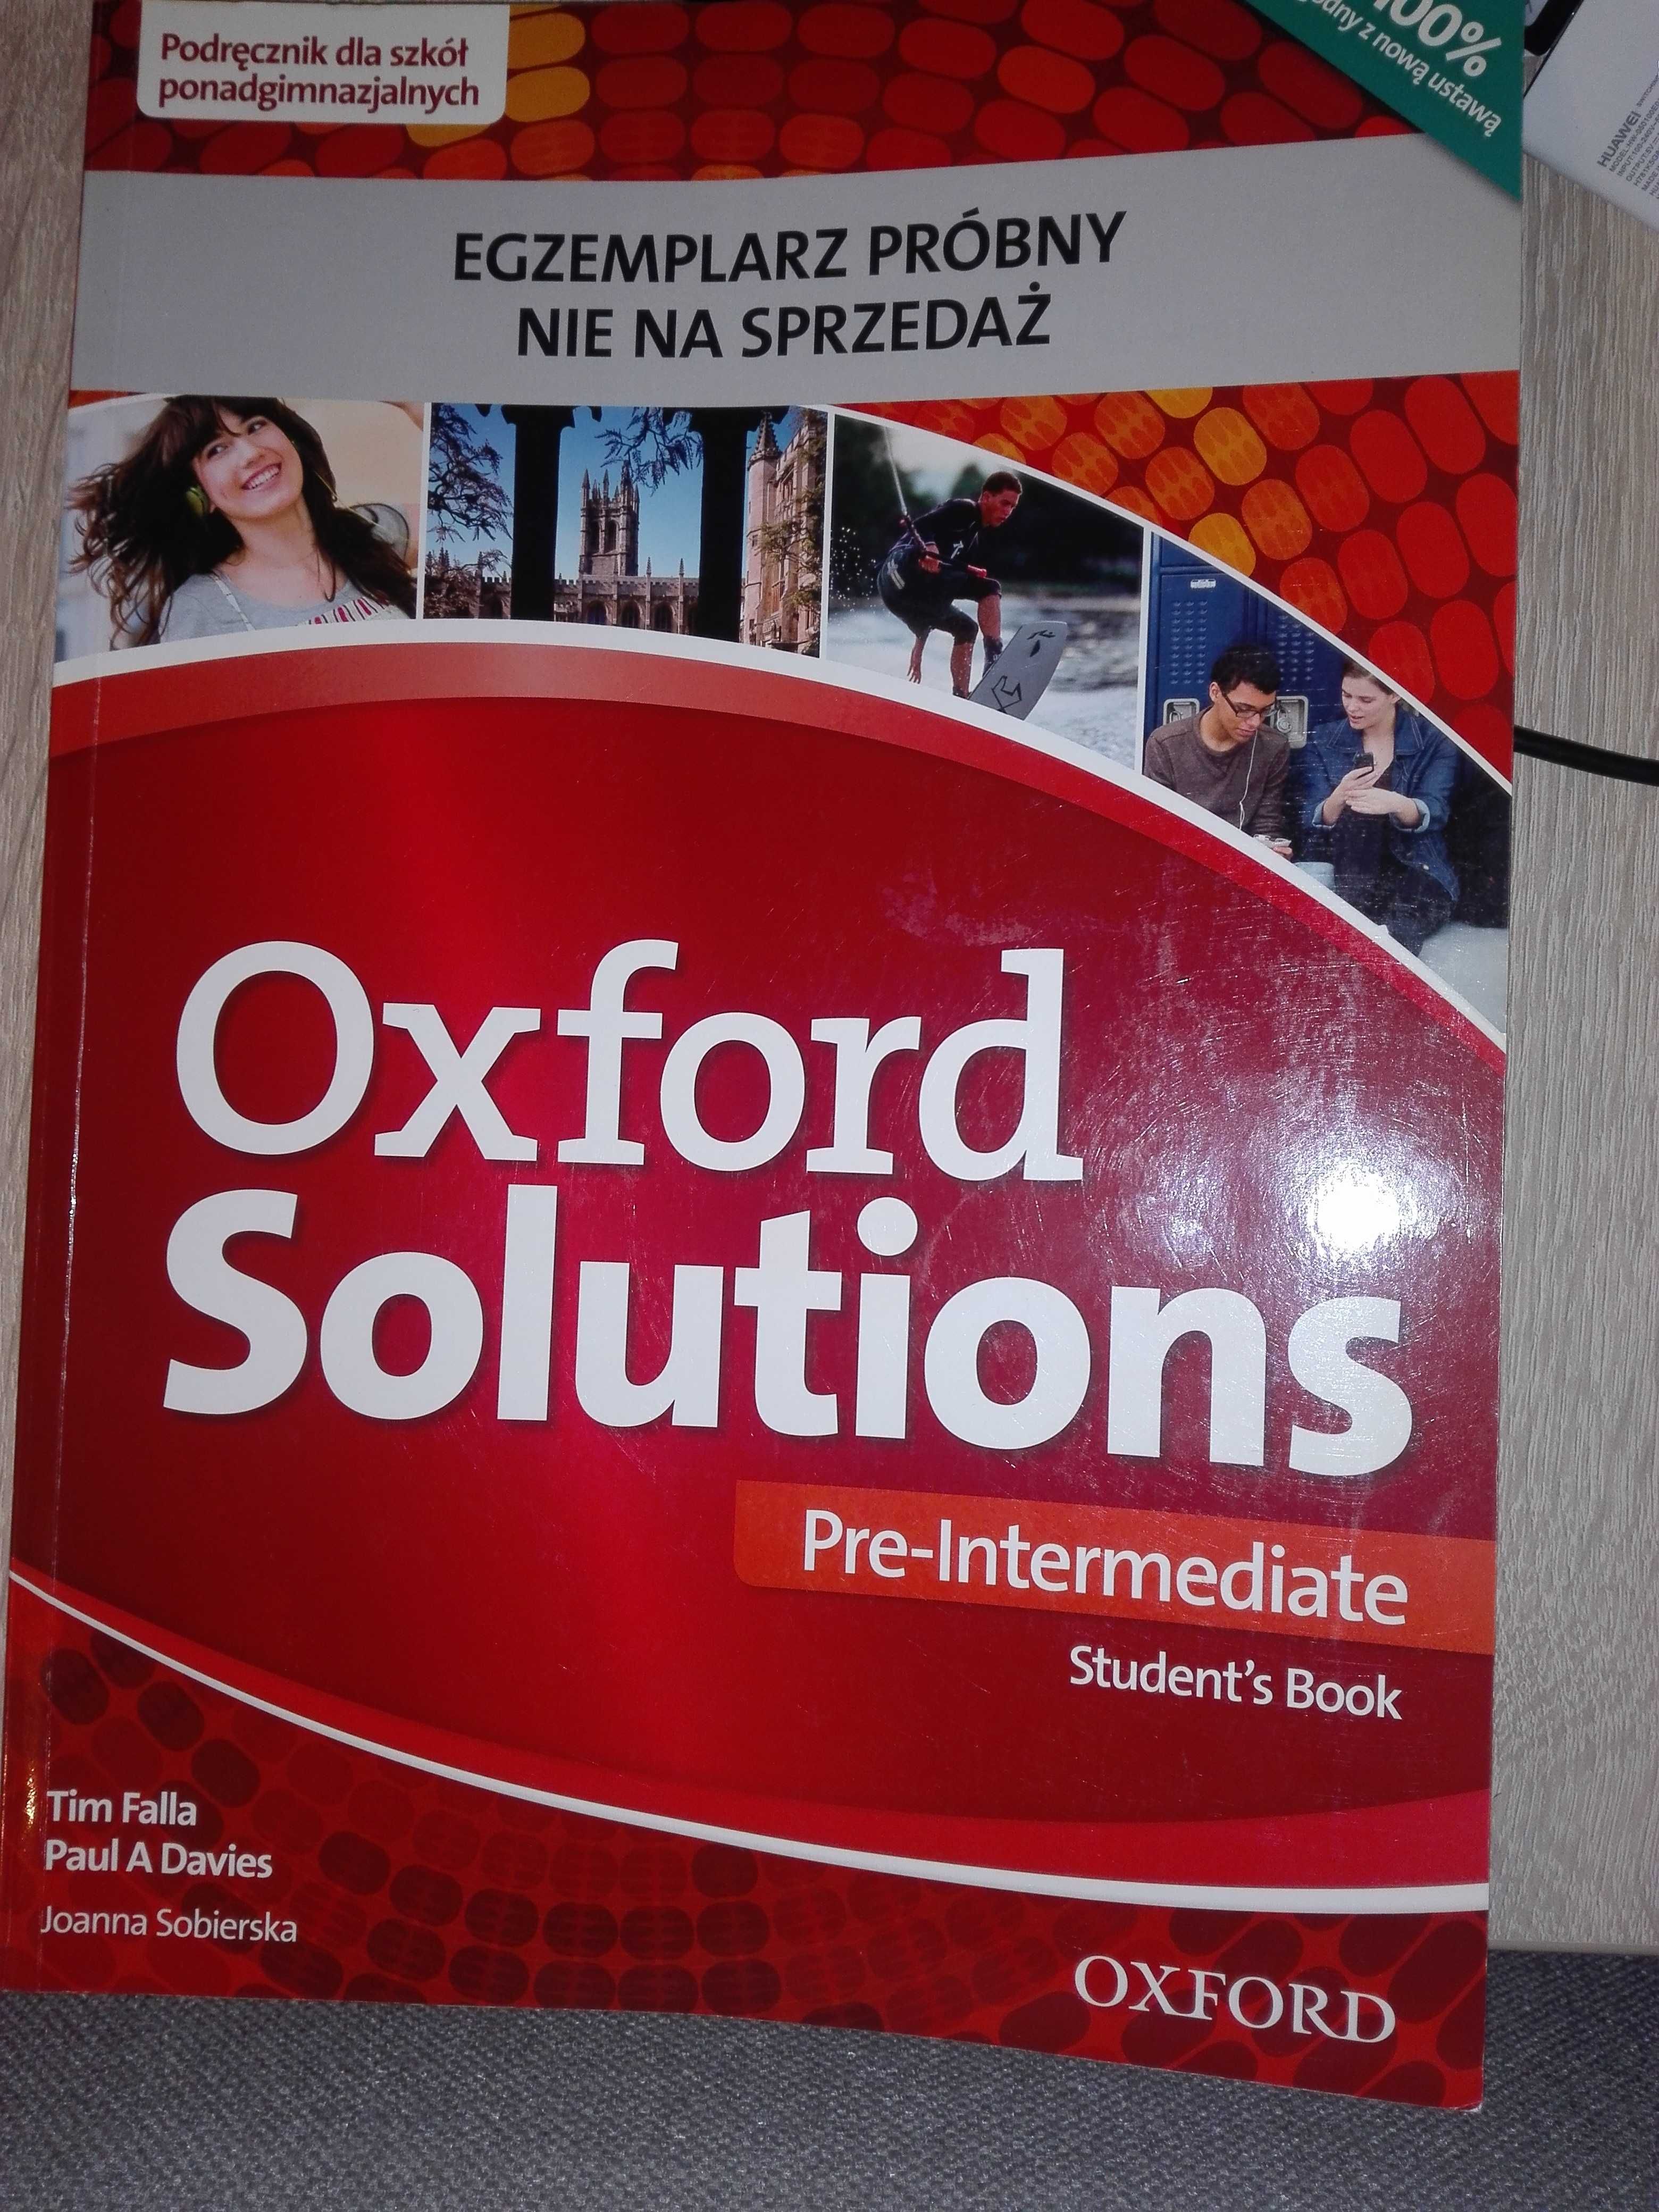 Oxford Solutions Student's Book